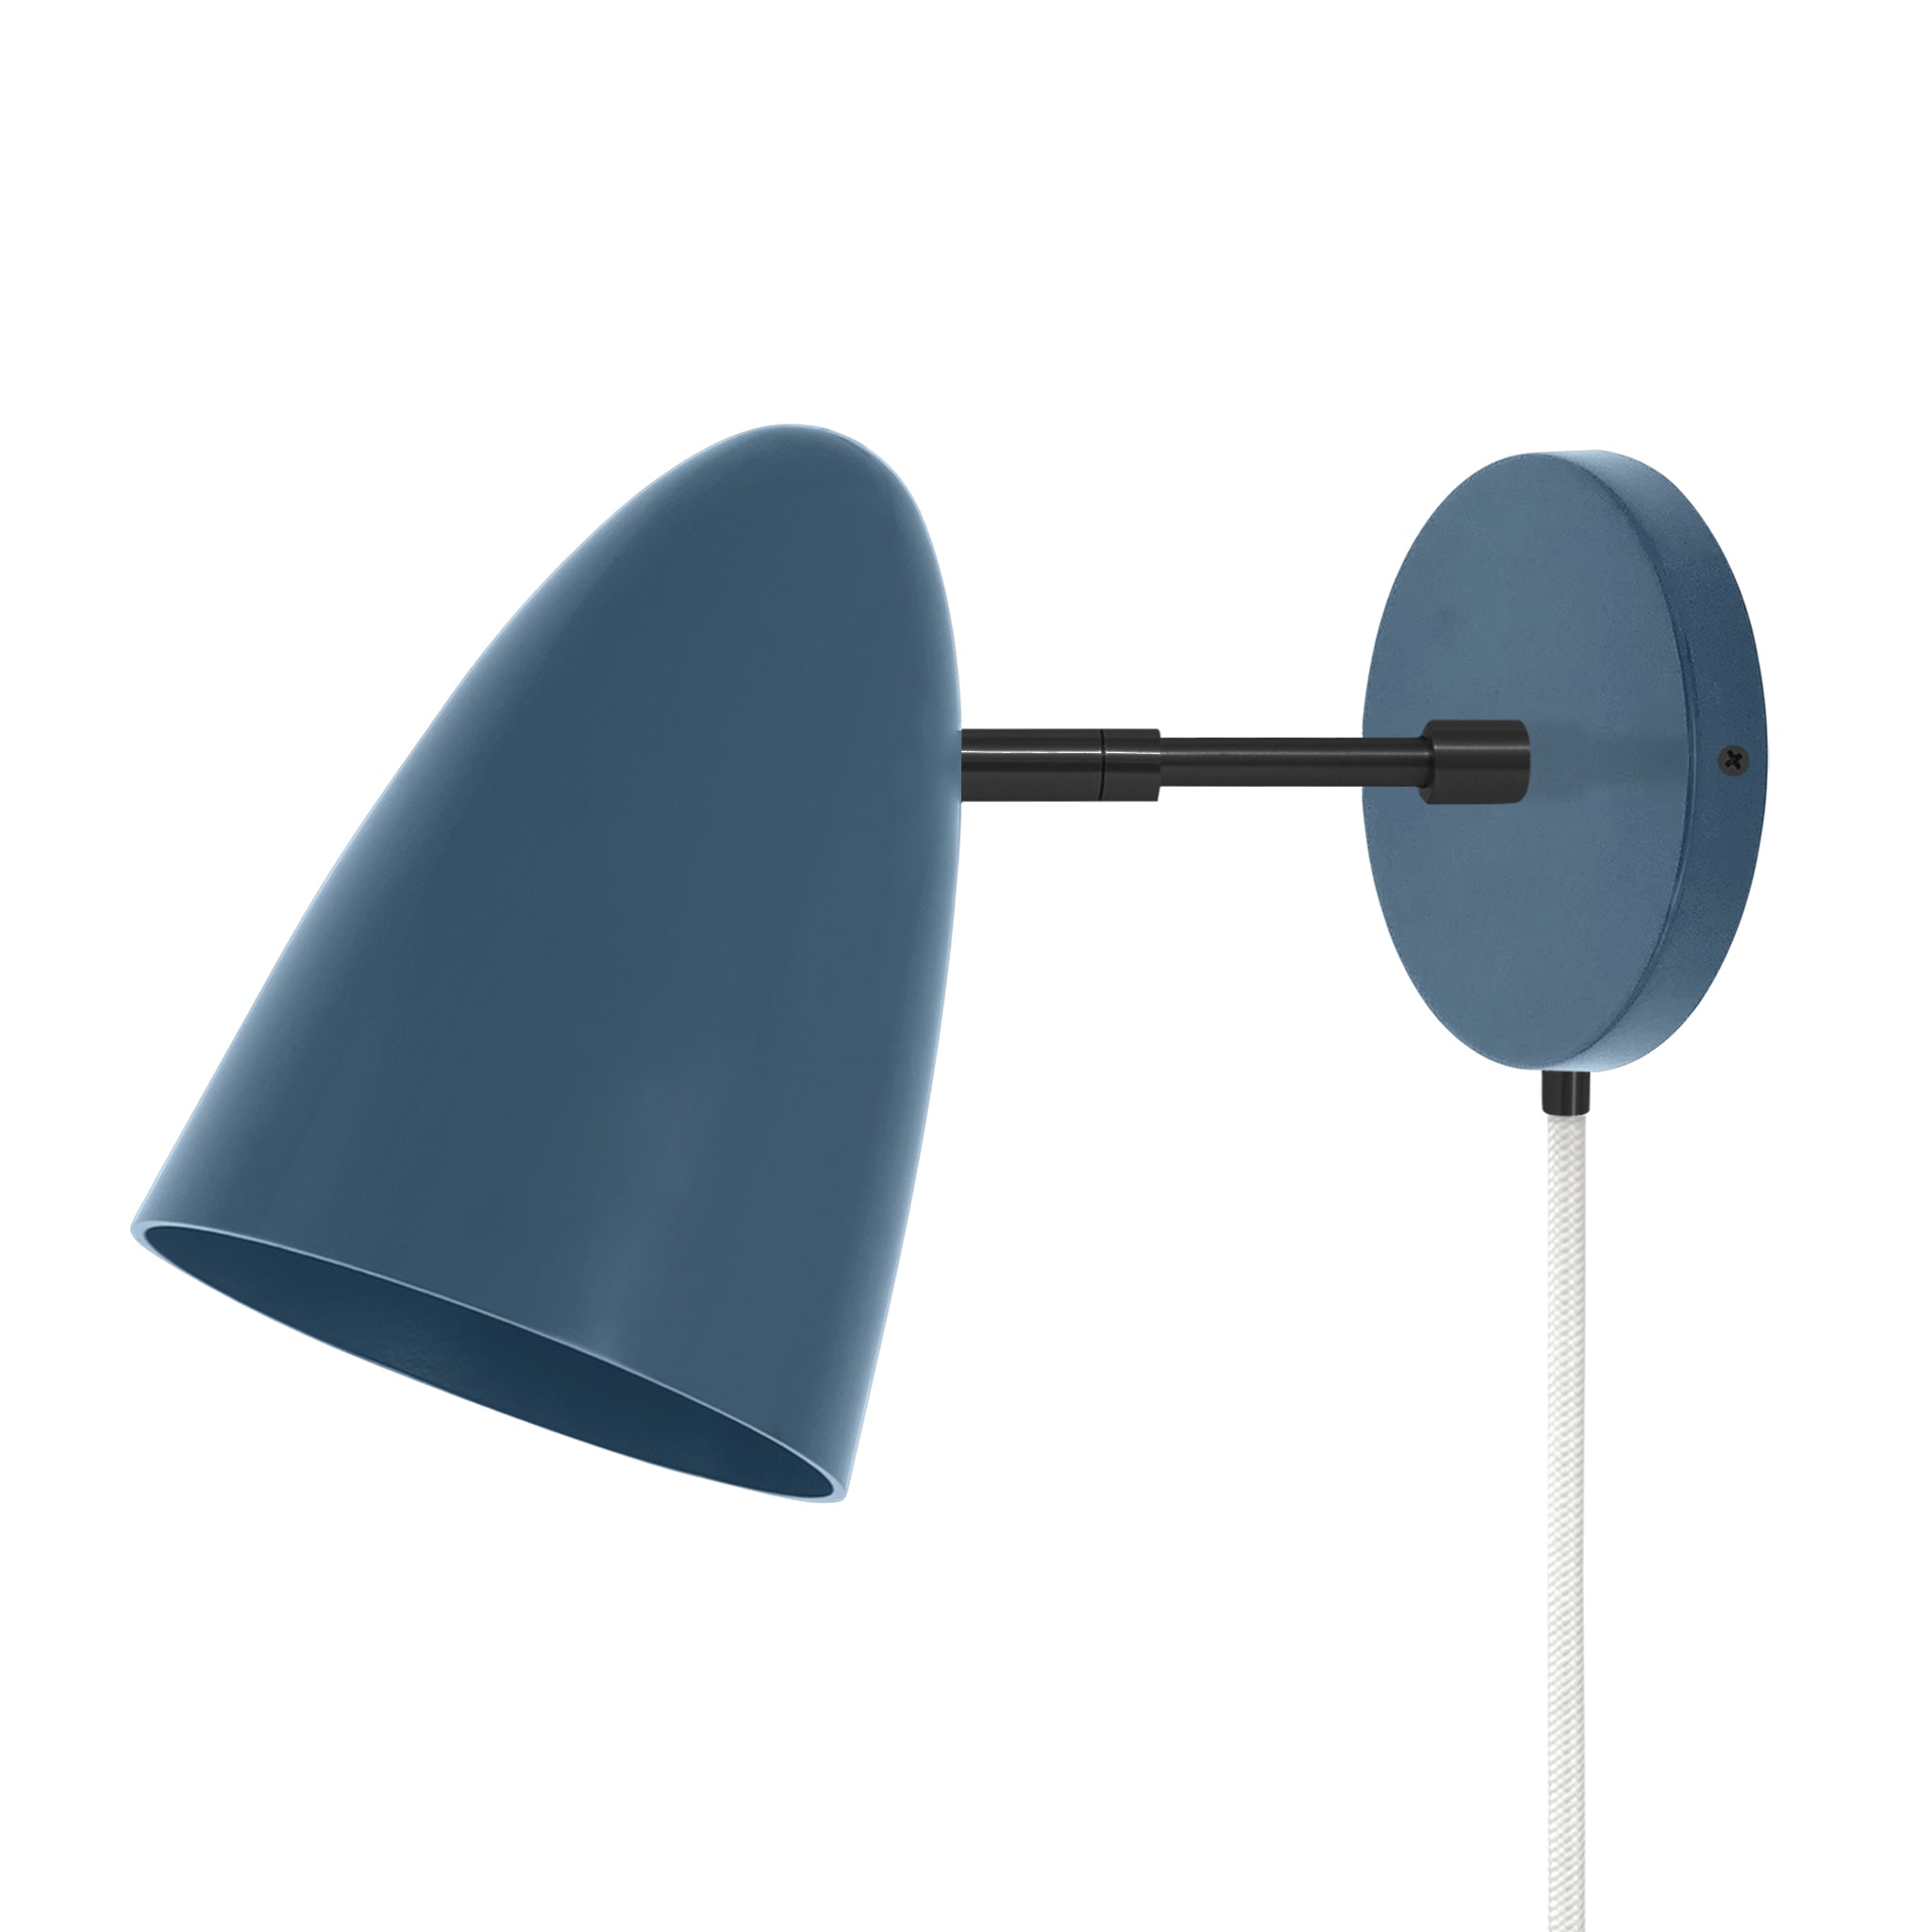 Black and slate blue color Boom plug-in sconce 3" arm Dutton Brown lighting